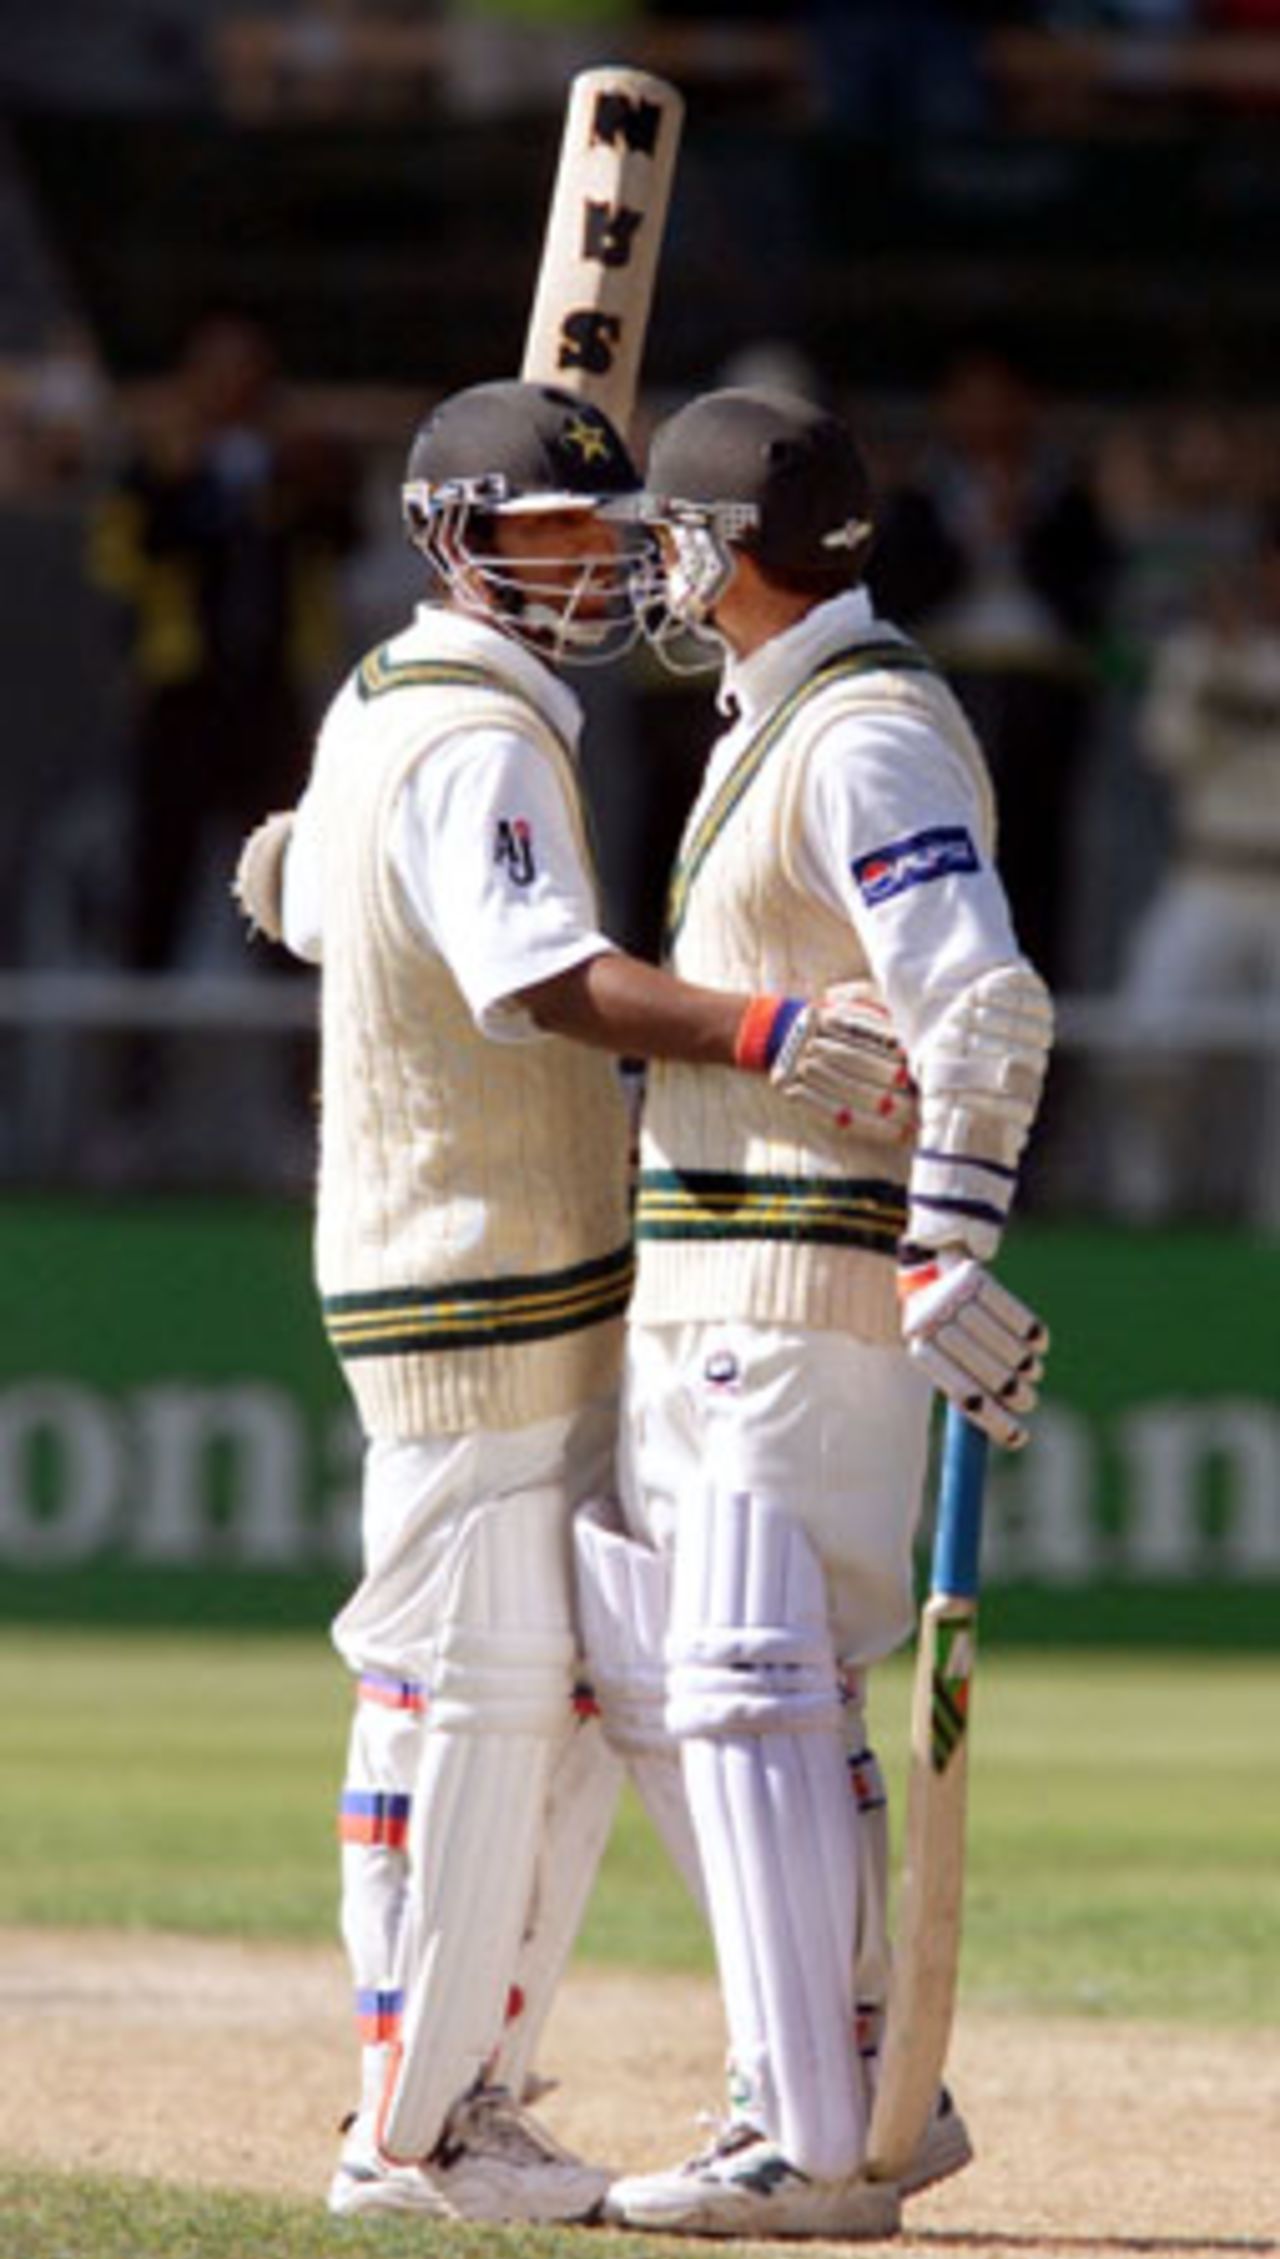 Pakistan batsman Yousuf Youhana is embraced by batting partner Saqlain Mushtaq upon reaching 150. Yousuf went on to score 203. It is his sixth Test century and highest first-class score. Yousuf and Saqlain shared in a seventh wicket partnership of 248. 2nd Test: New Zealand v Pakistan at Jade Stadium, Christchurch, 15-19 March 2001 (18 March 2001).